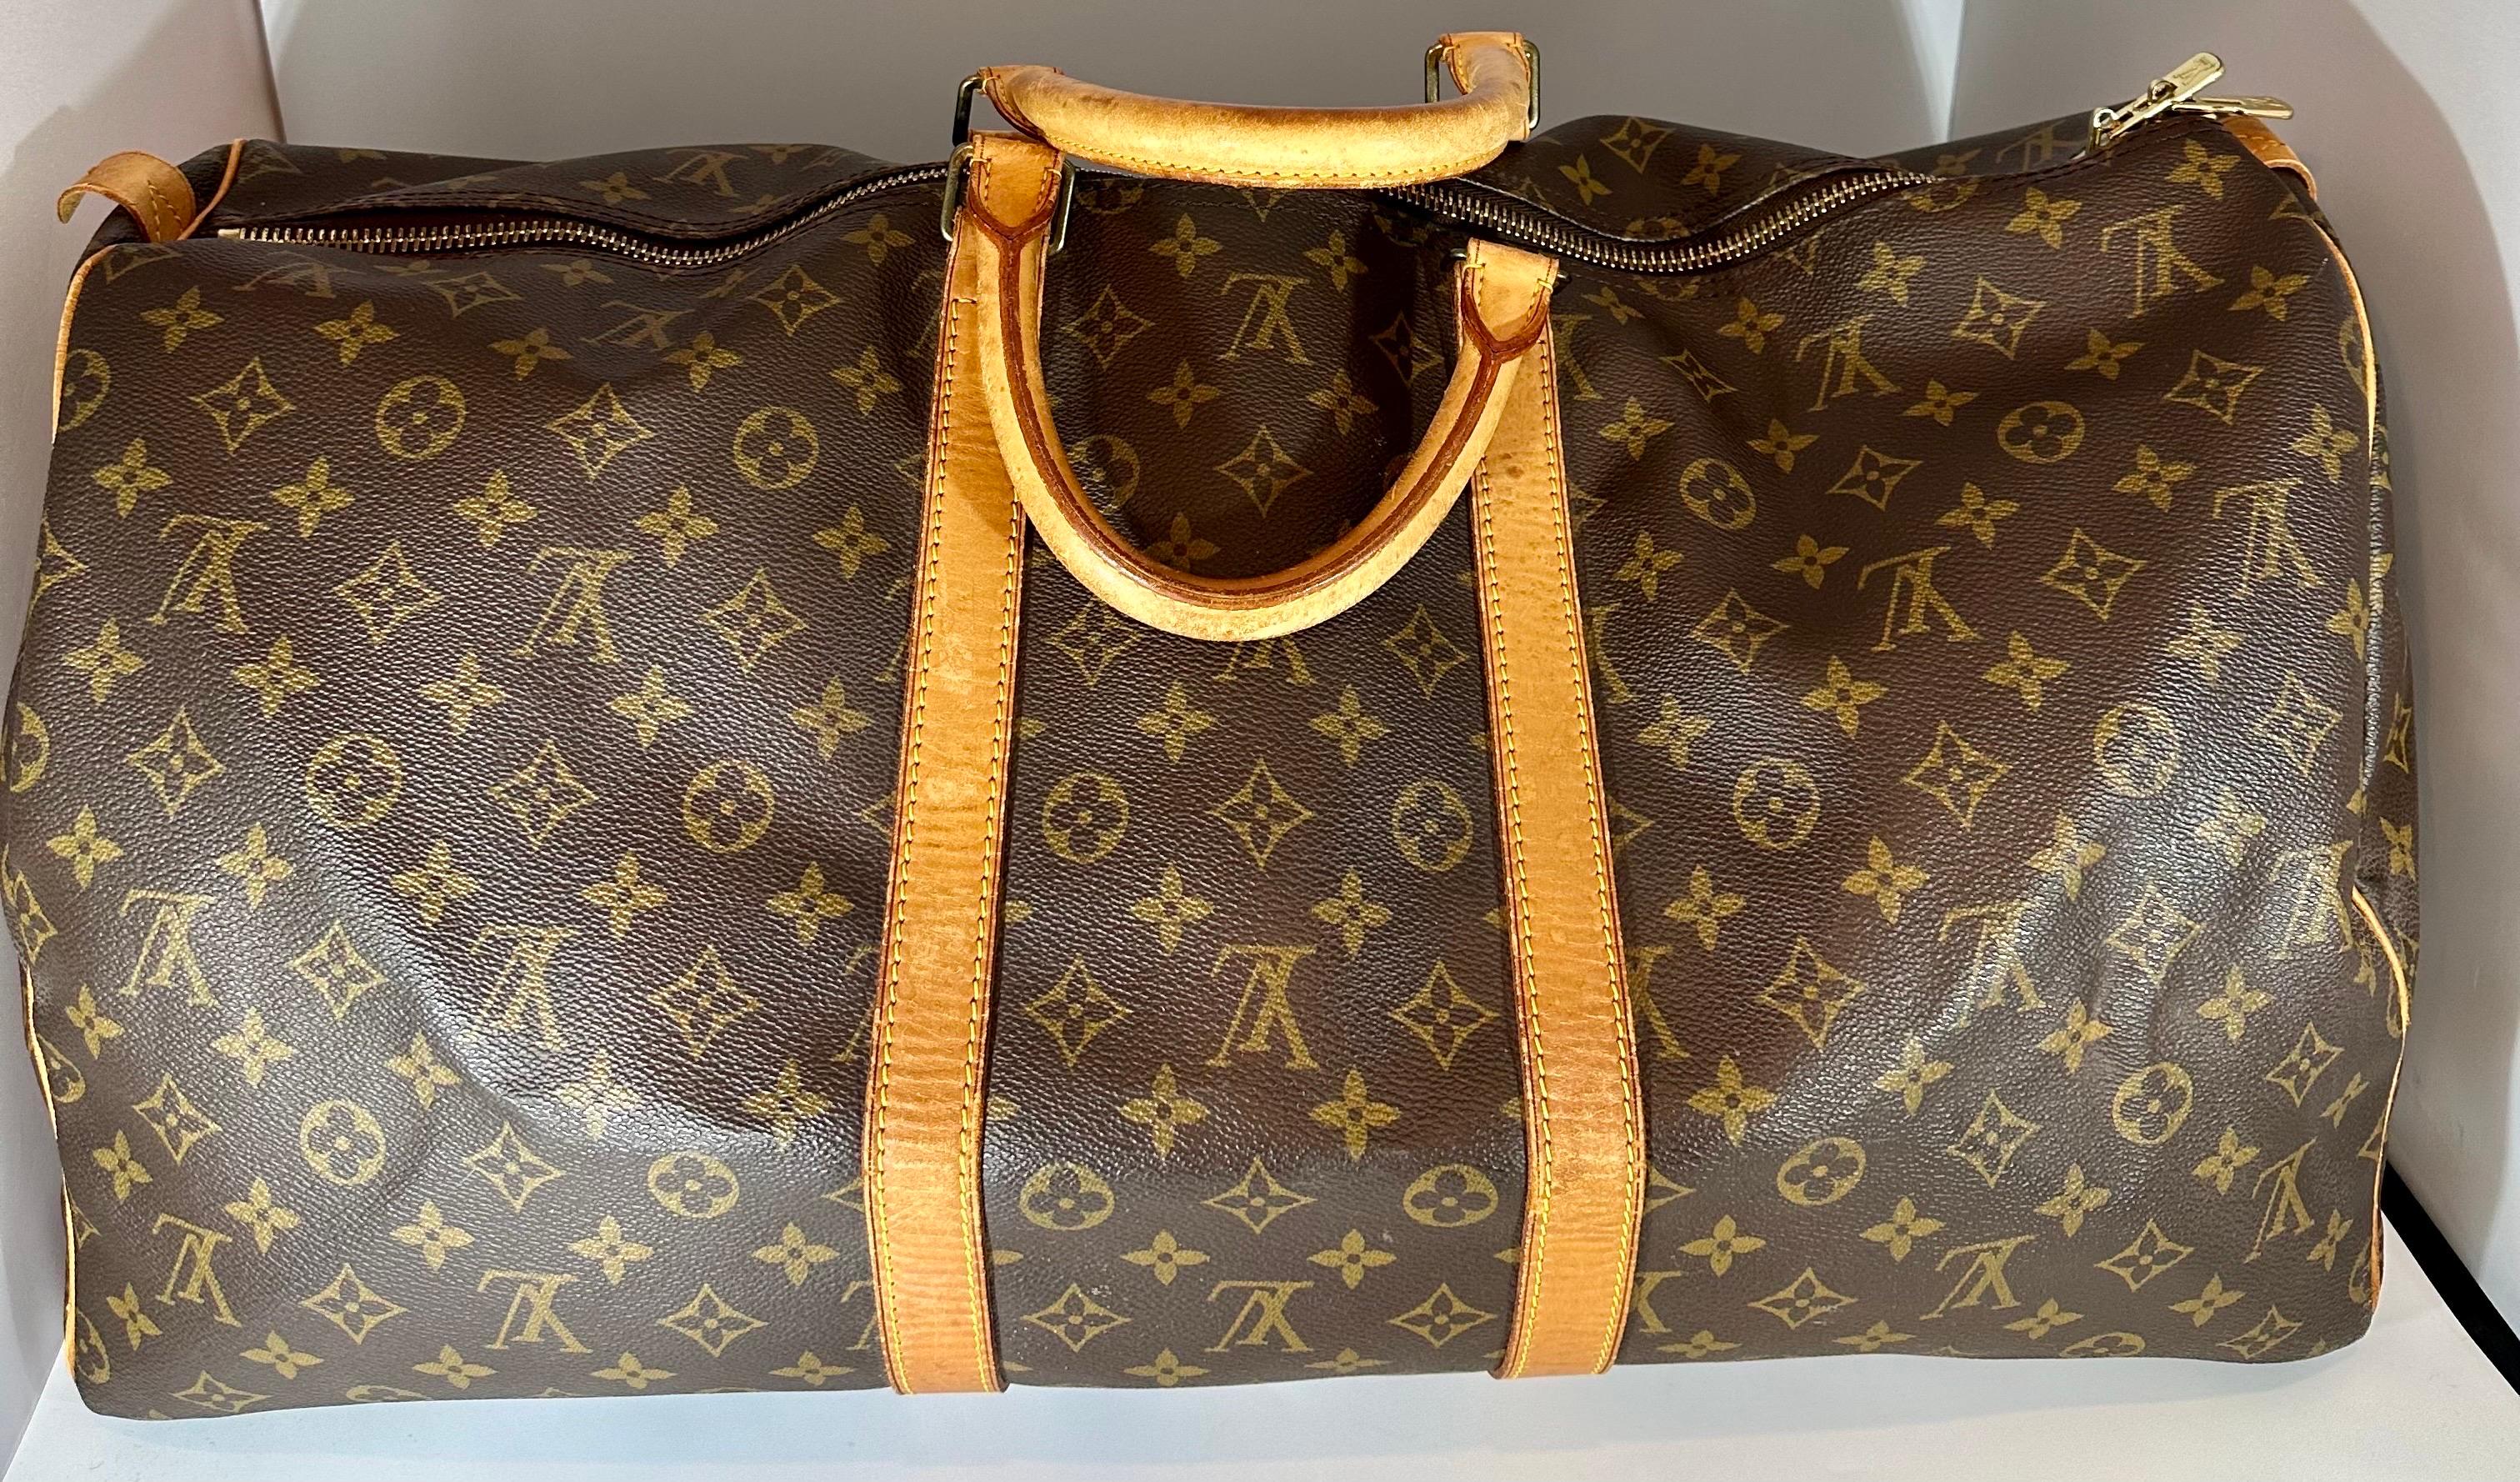 A Louis Vuitton logo-printed Louis Vuitton Keepall 55 with leather trim with bring a touch of heritage luxury wherever you carry it.
Over all  good condition,
I have added lots of pictures of the original bag so please take a look at ball the